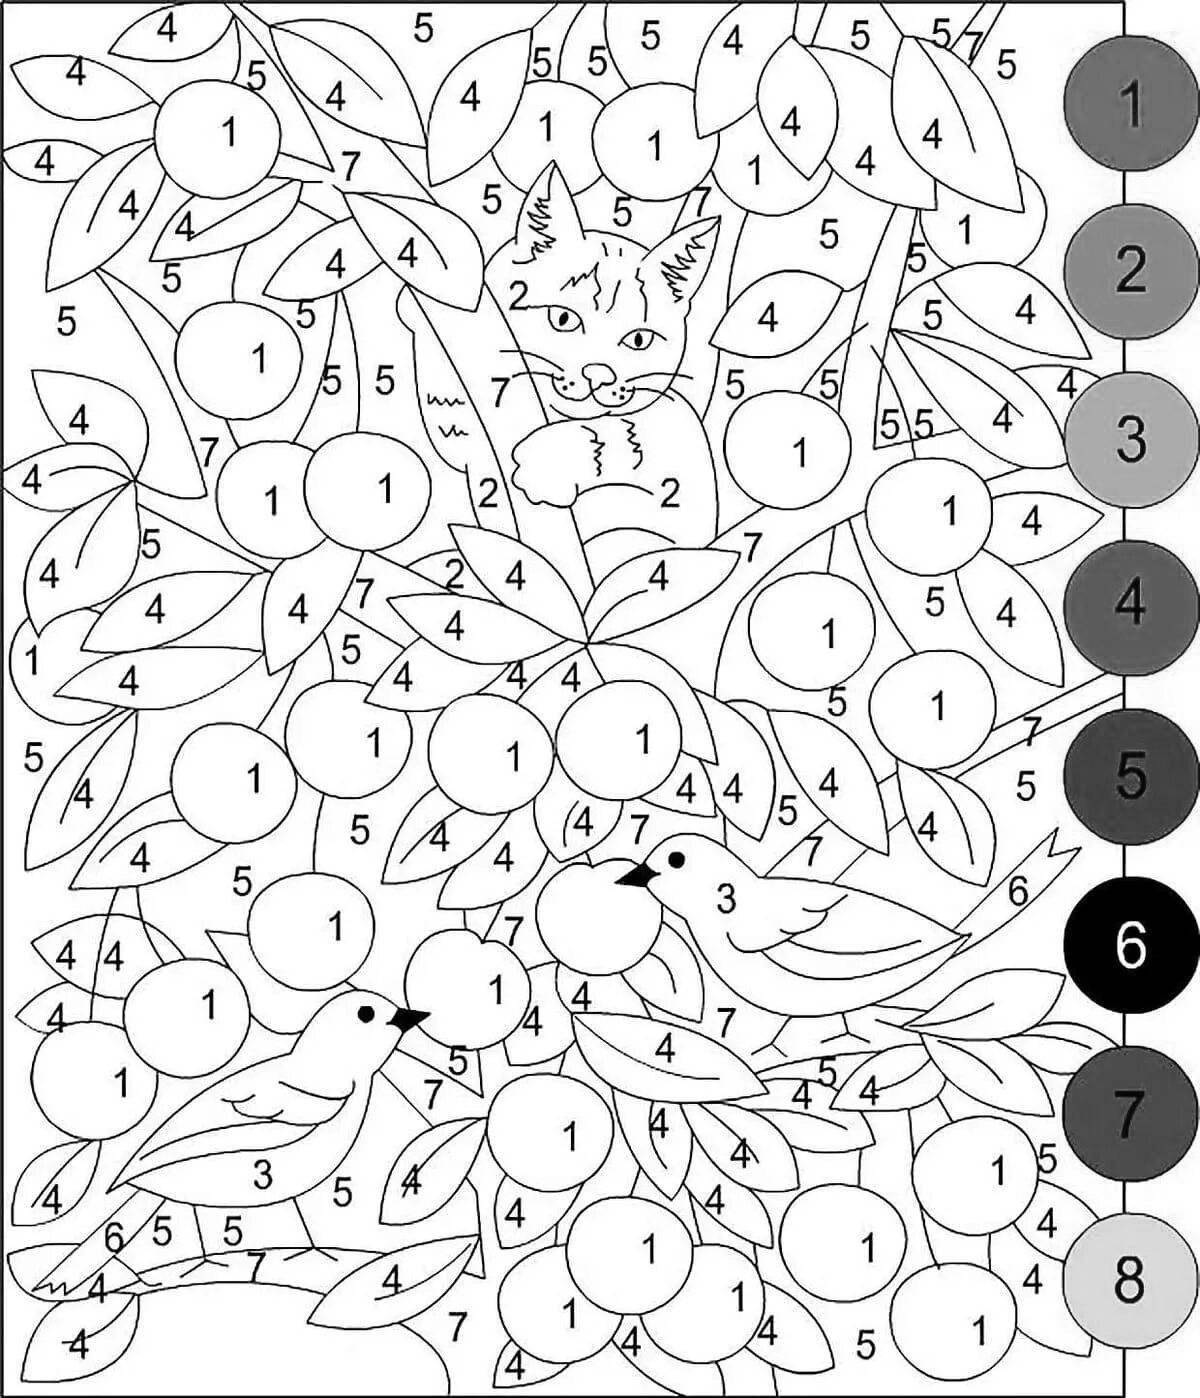 Inspirational coloring game by numbers in contact